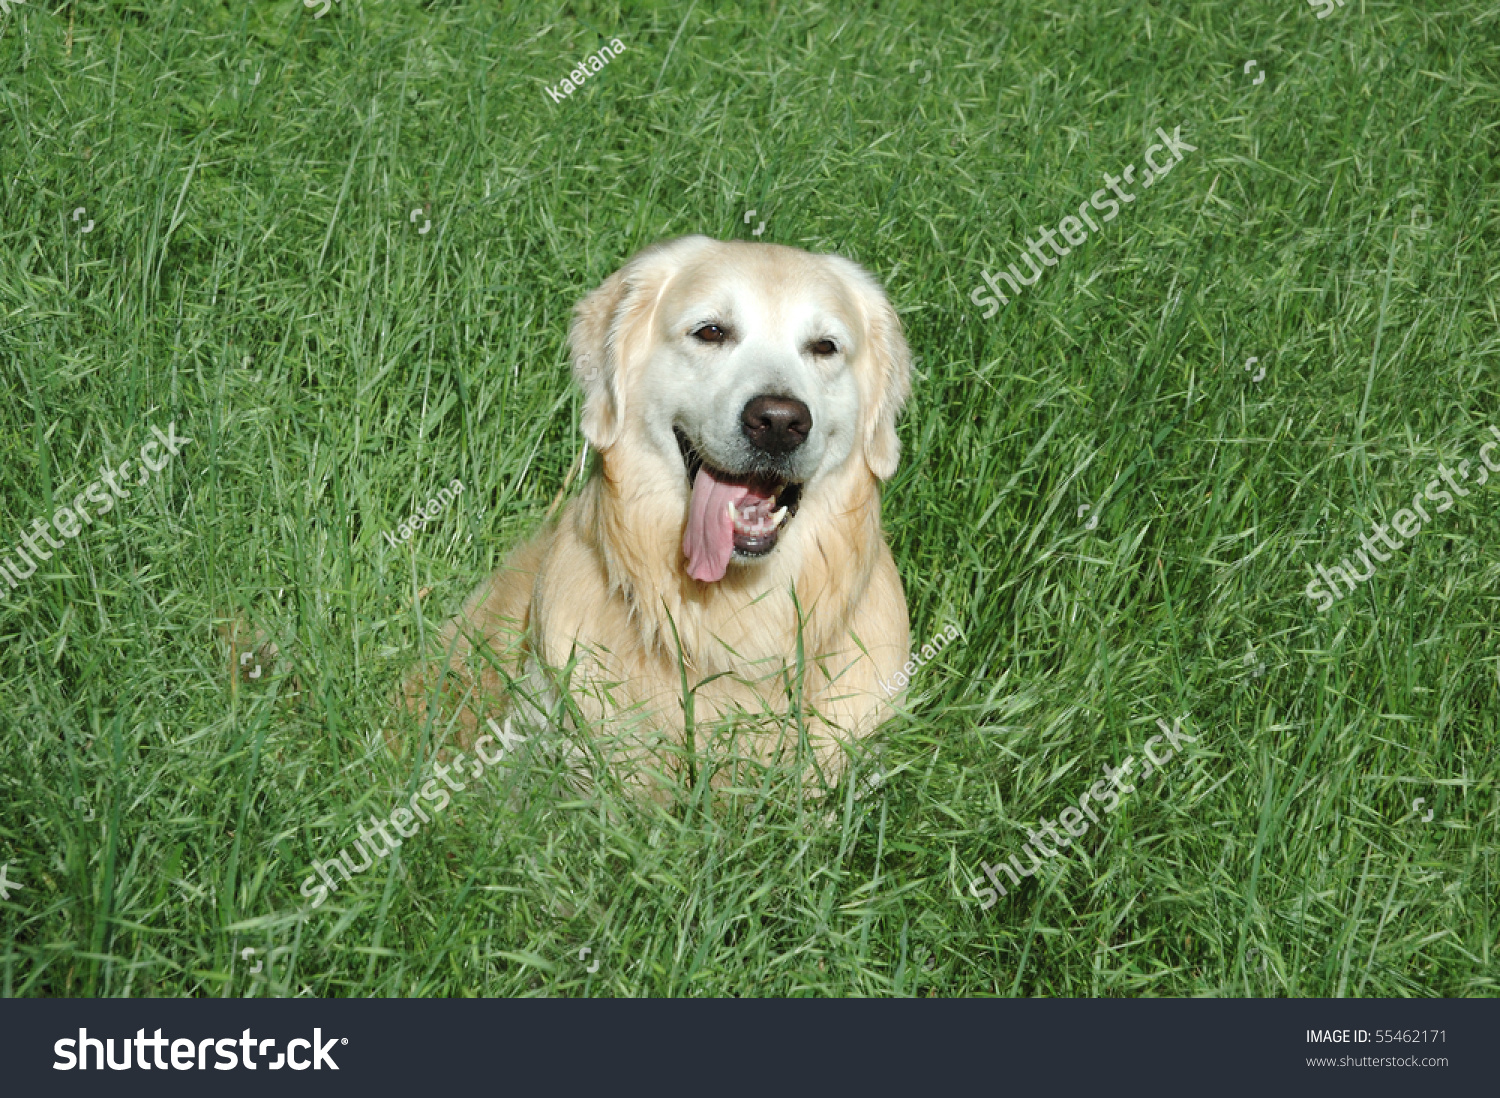 Happy golden retriever dog sitting in the thick green grass #55462171